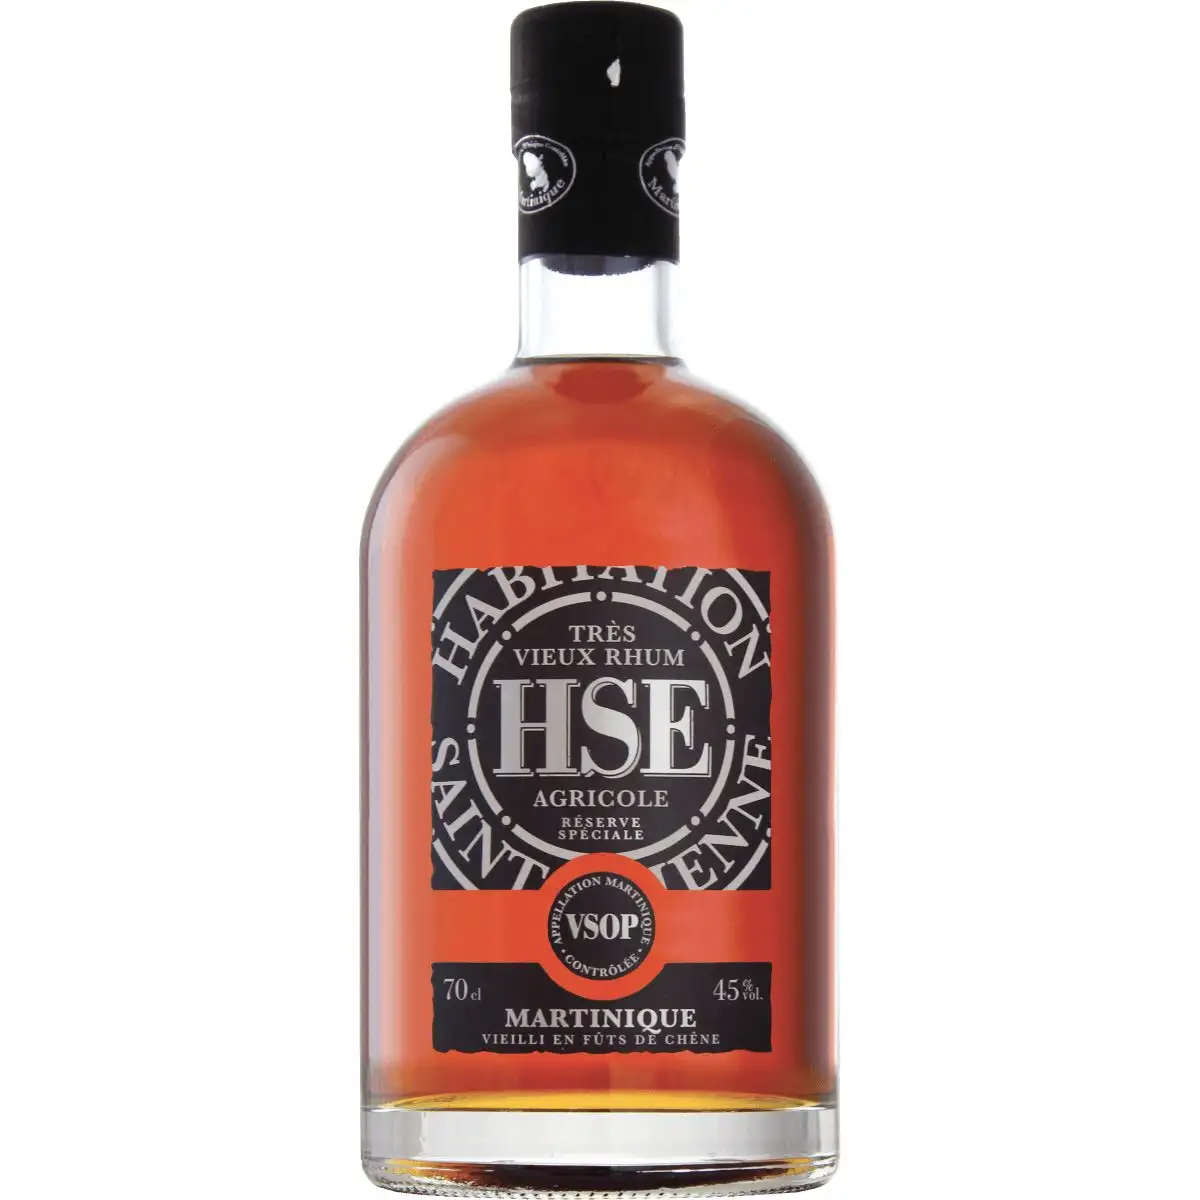 Image of the front of the bottle of the rum HSE Réserve Spéciale VSOP